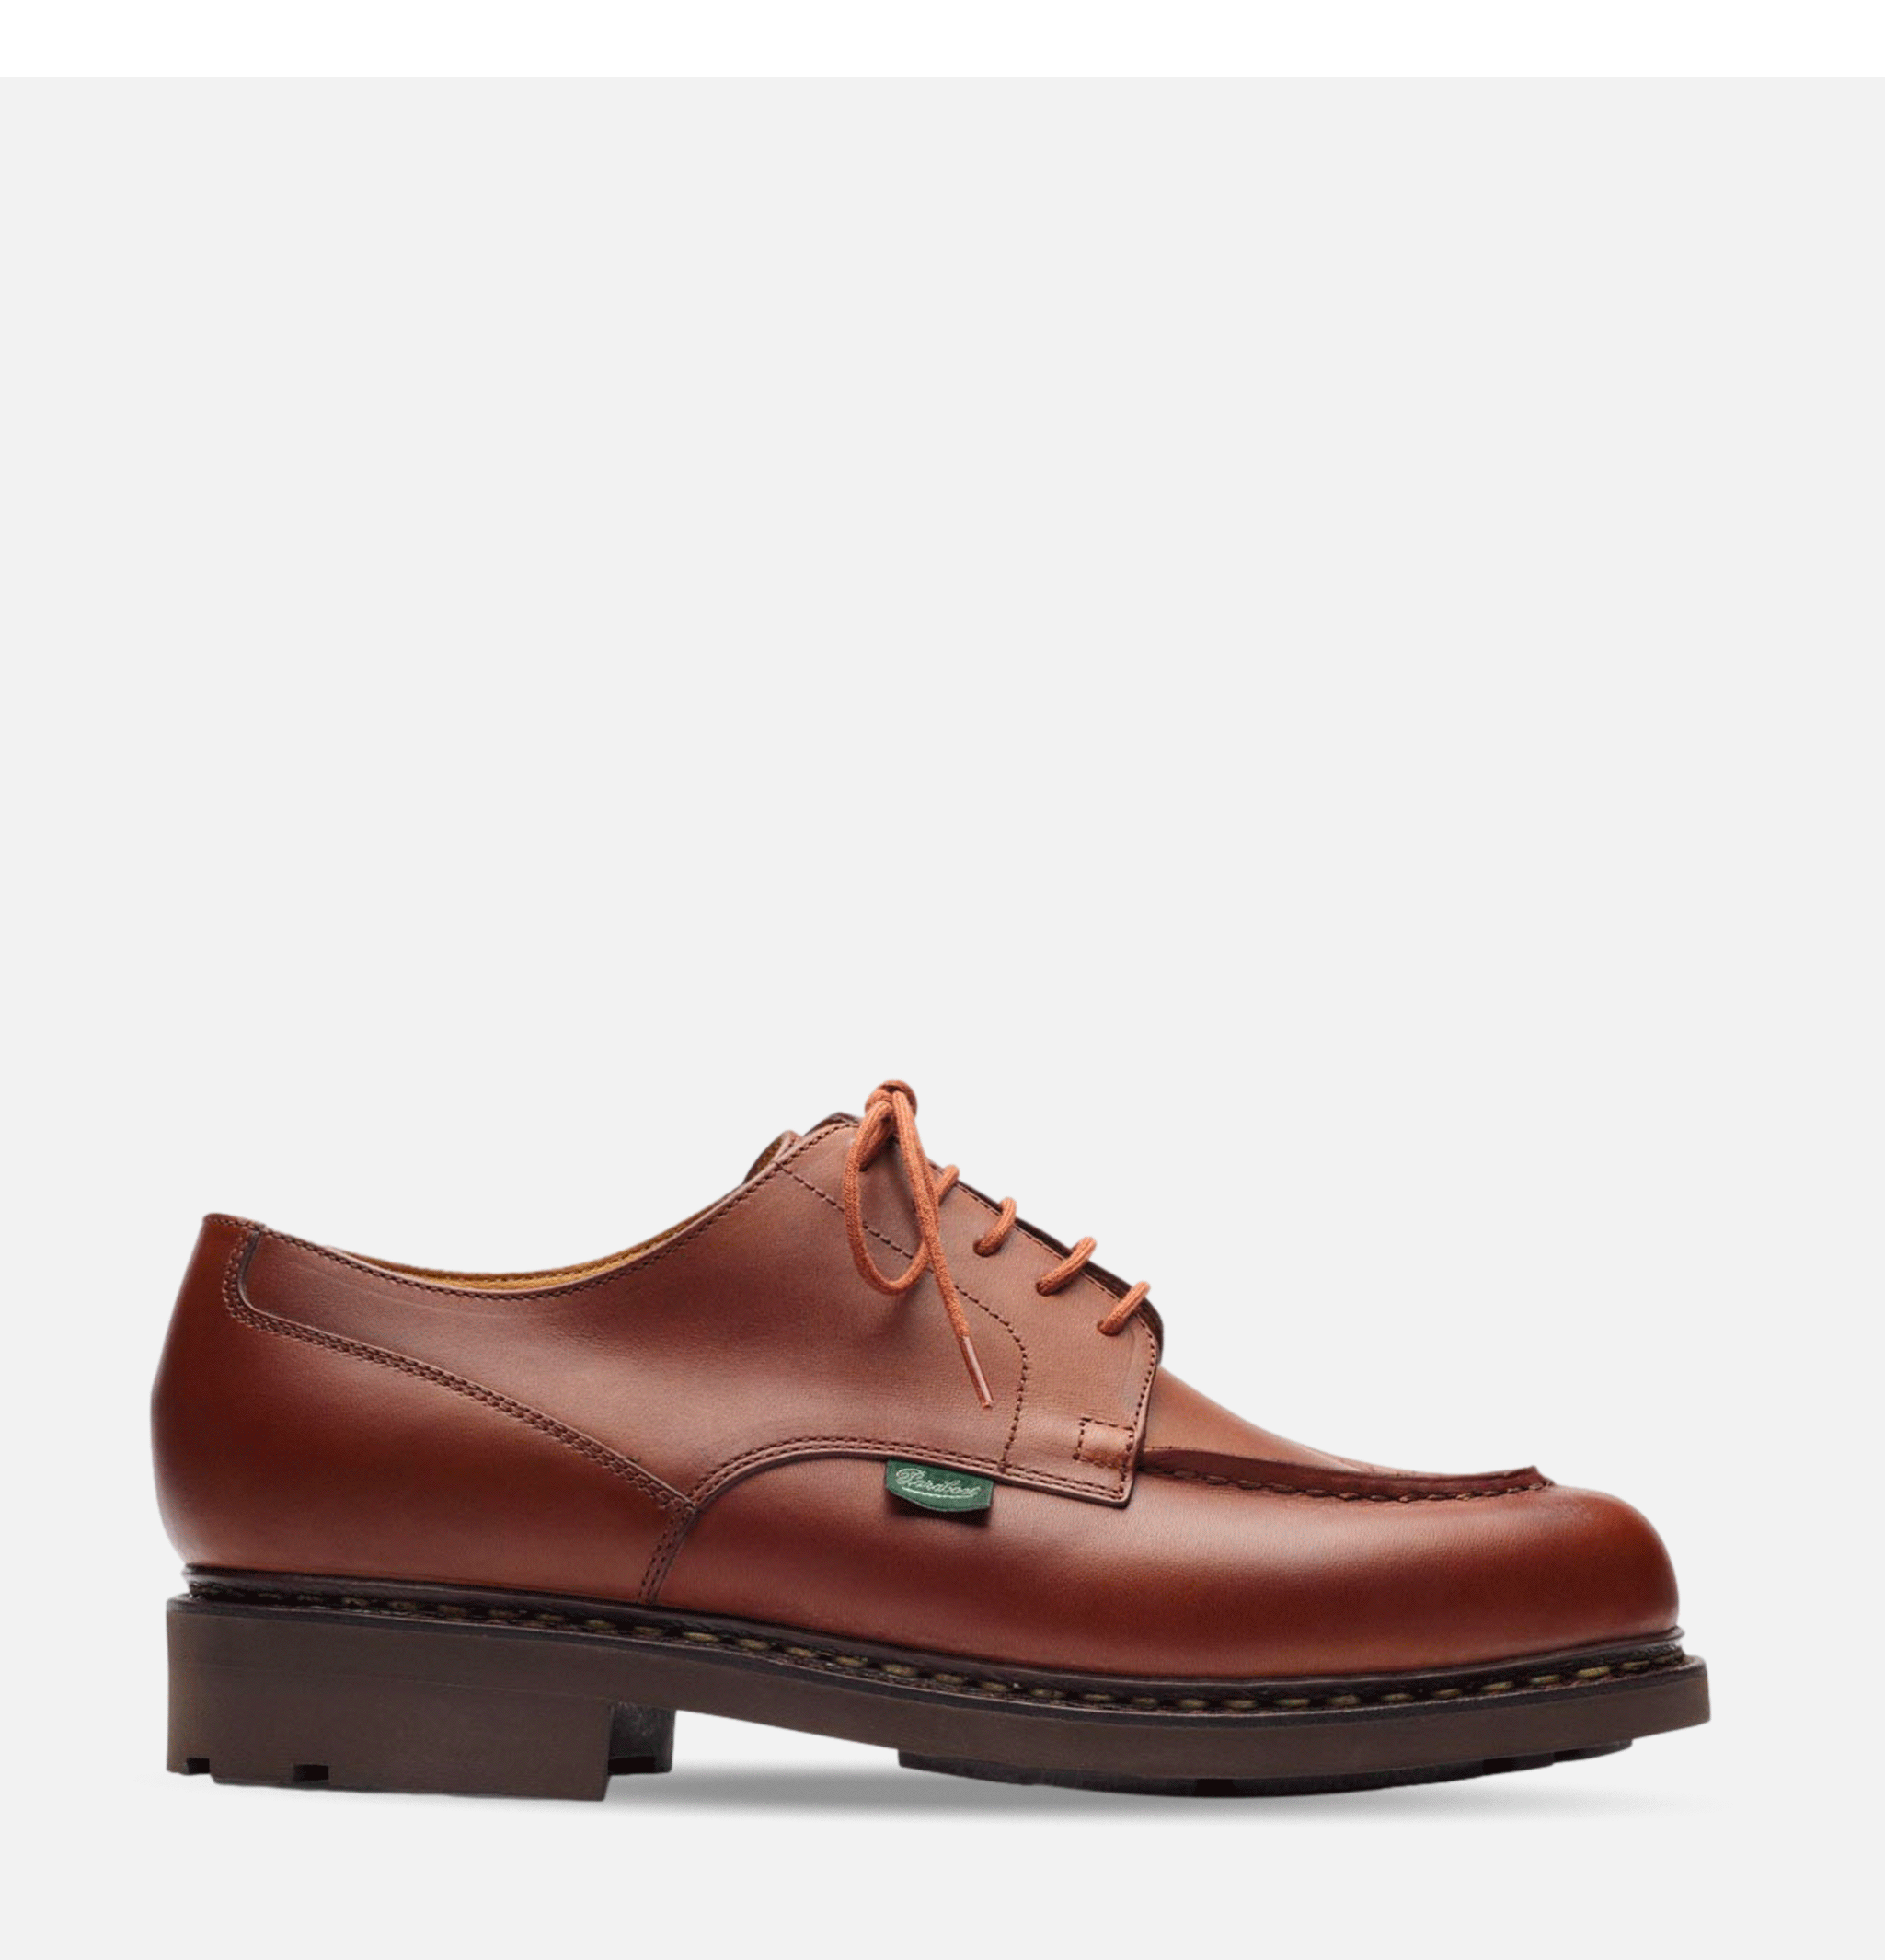 Chambord Shoes Brown